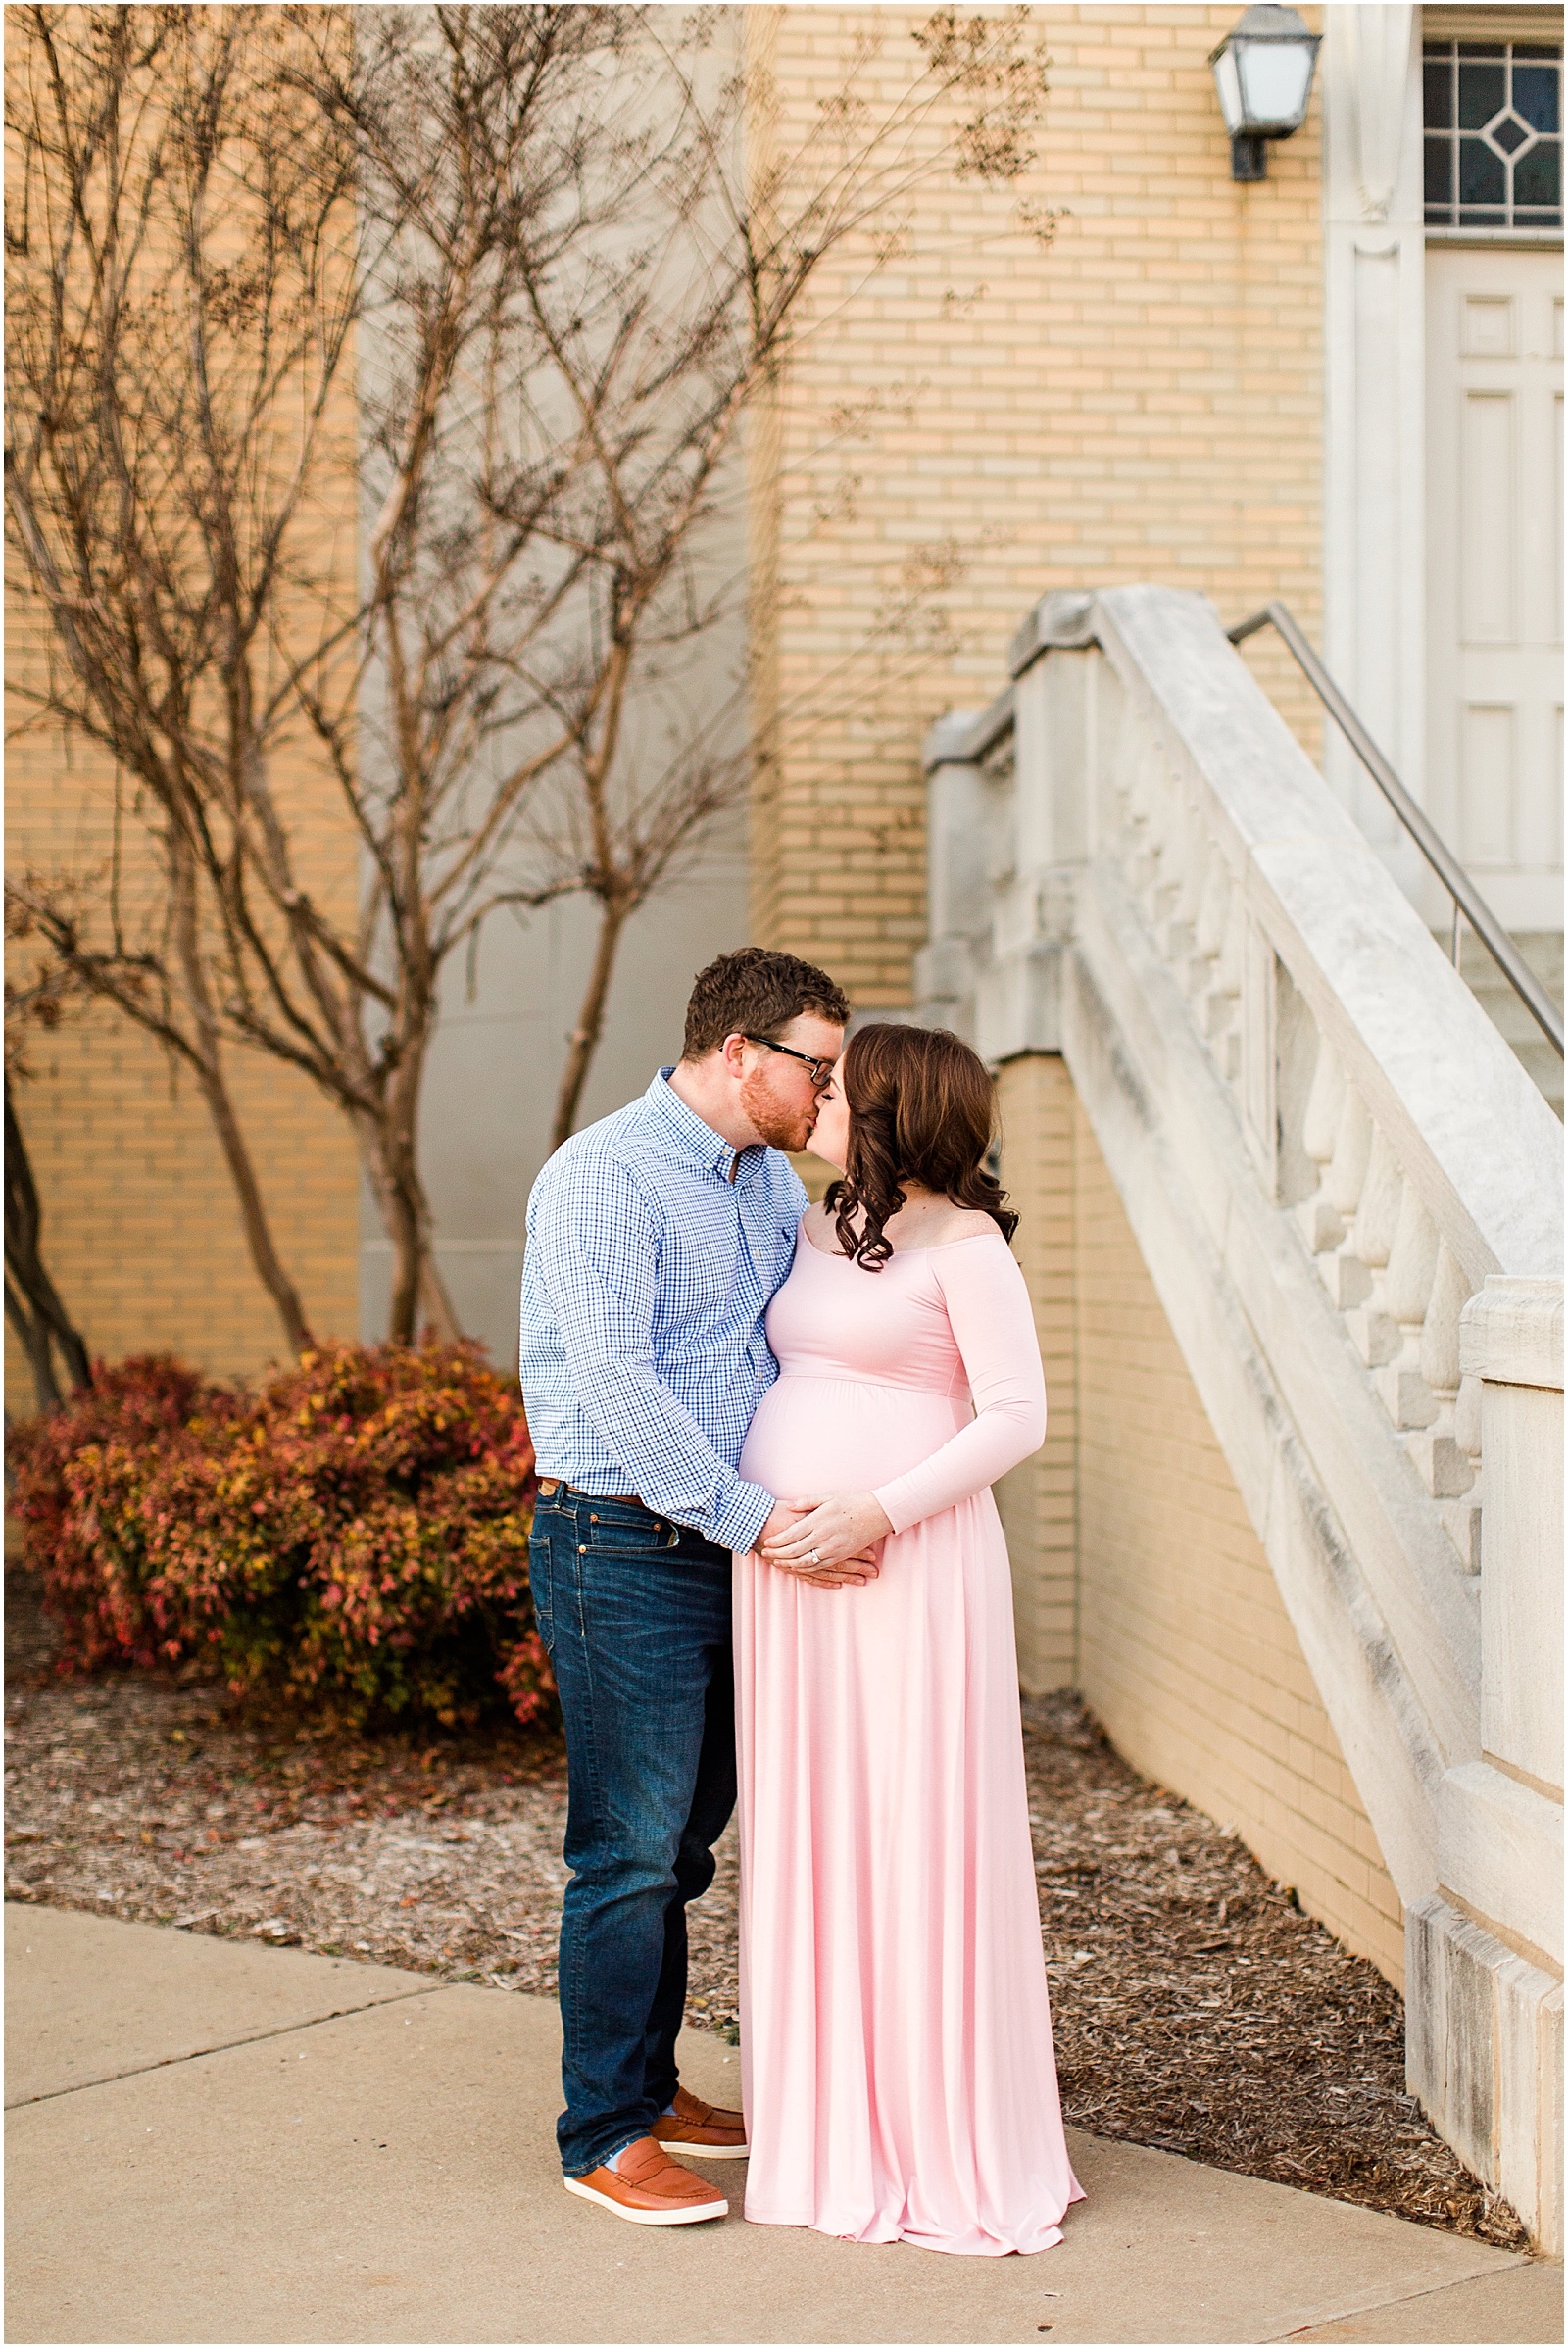 A Downtown Owensboro Maternity Session | Kayla and Grant Evansville Indiana Wedding Photographers-0027.jpg